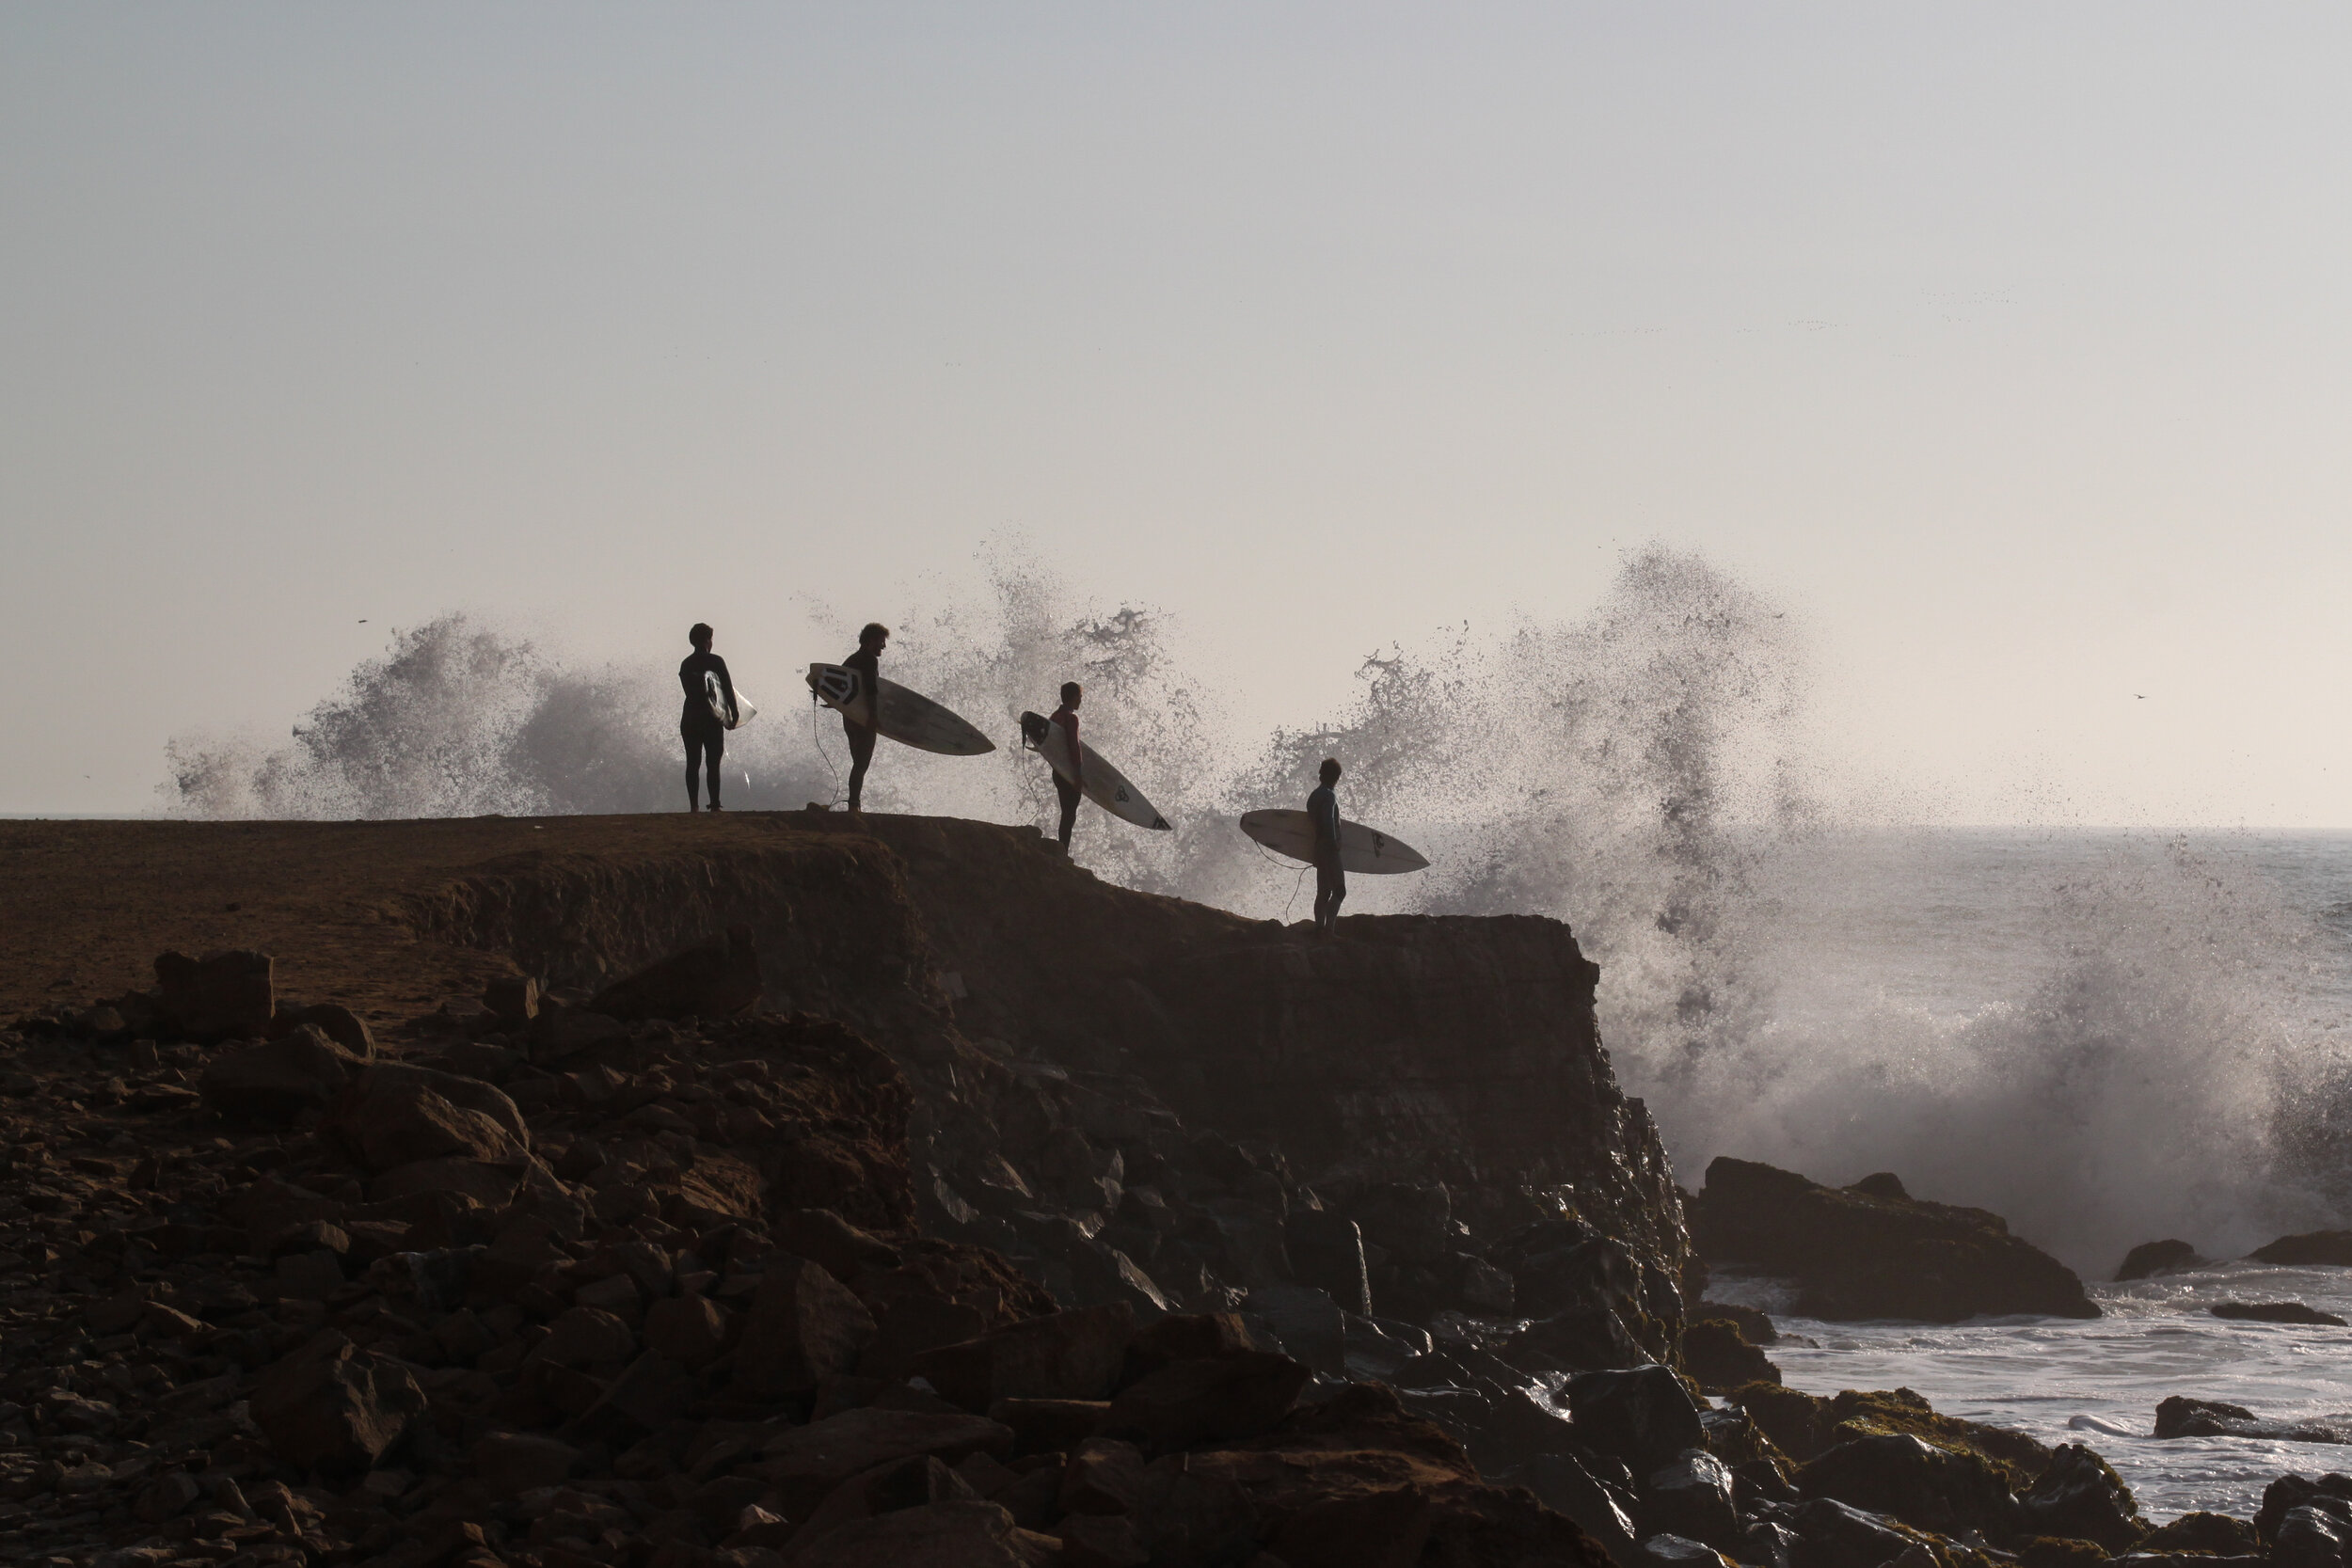 Four surfers waiting to enter the Ocean in Lima, Peru.